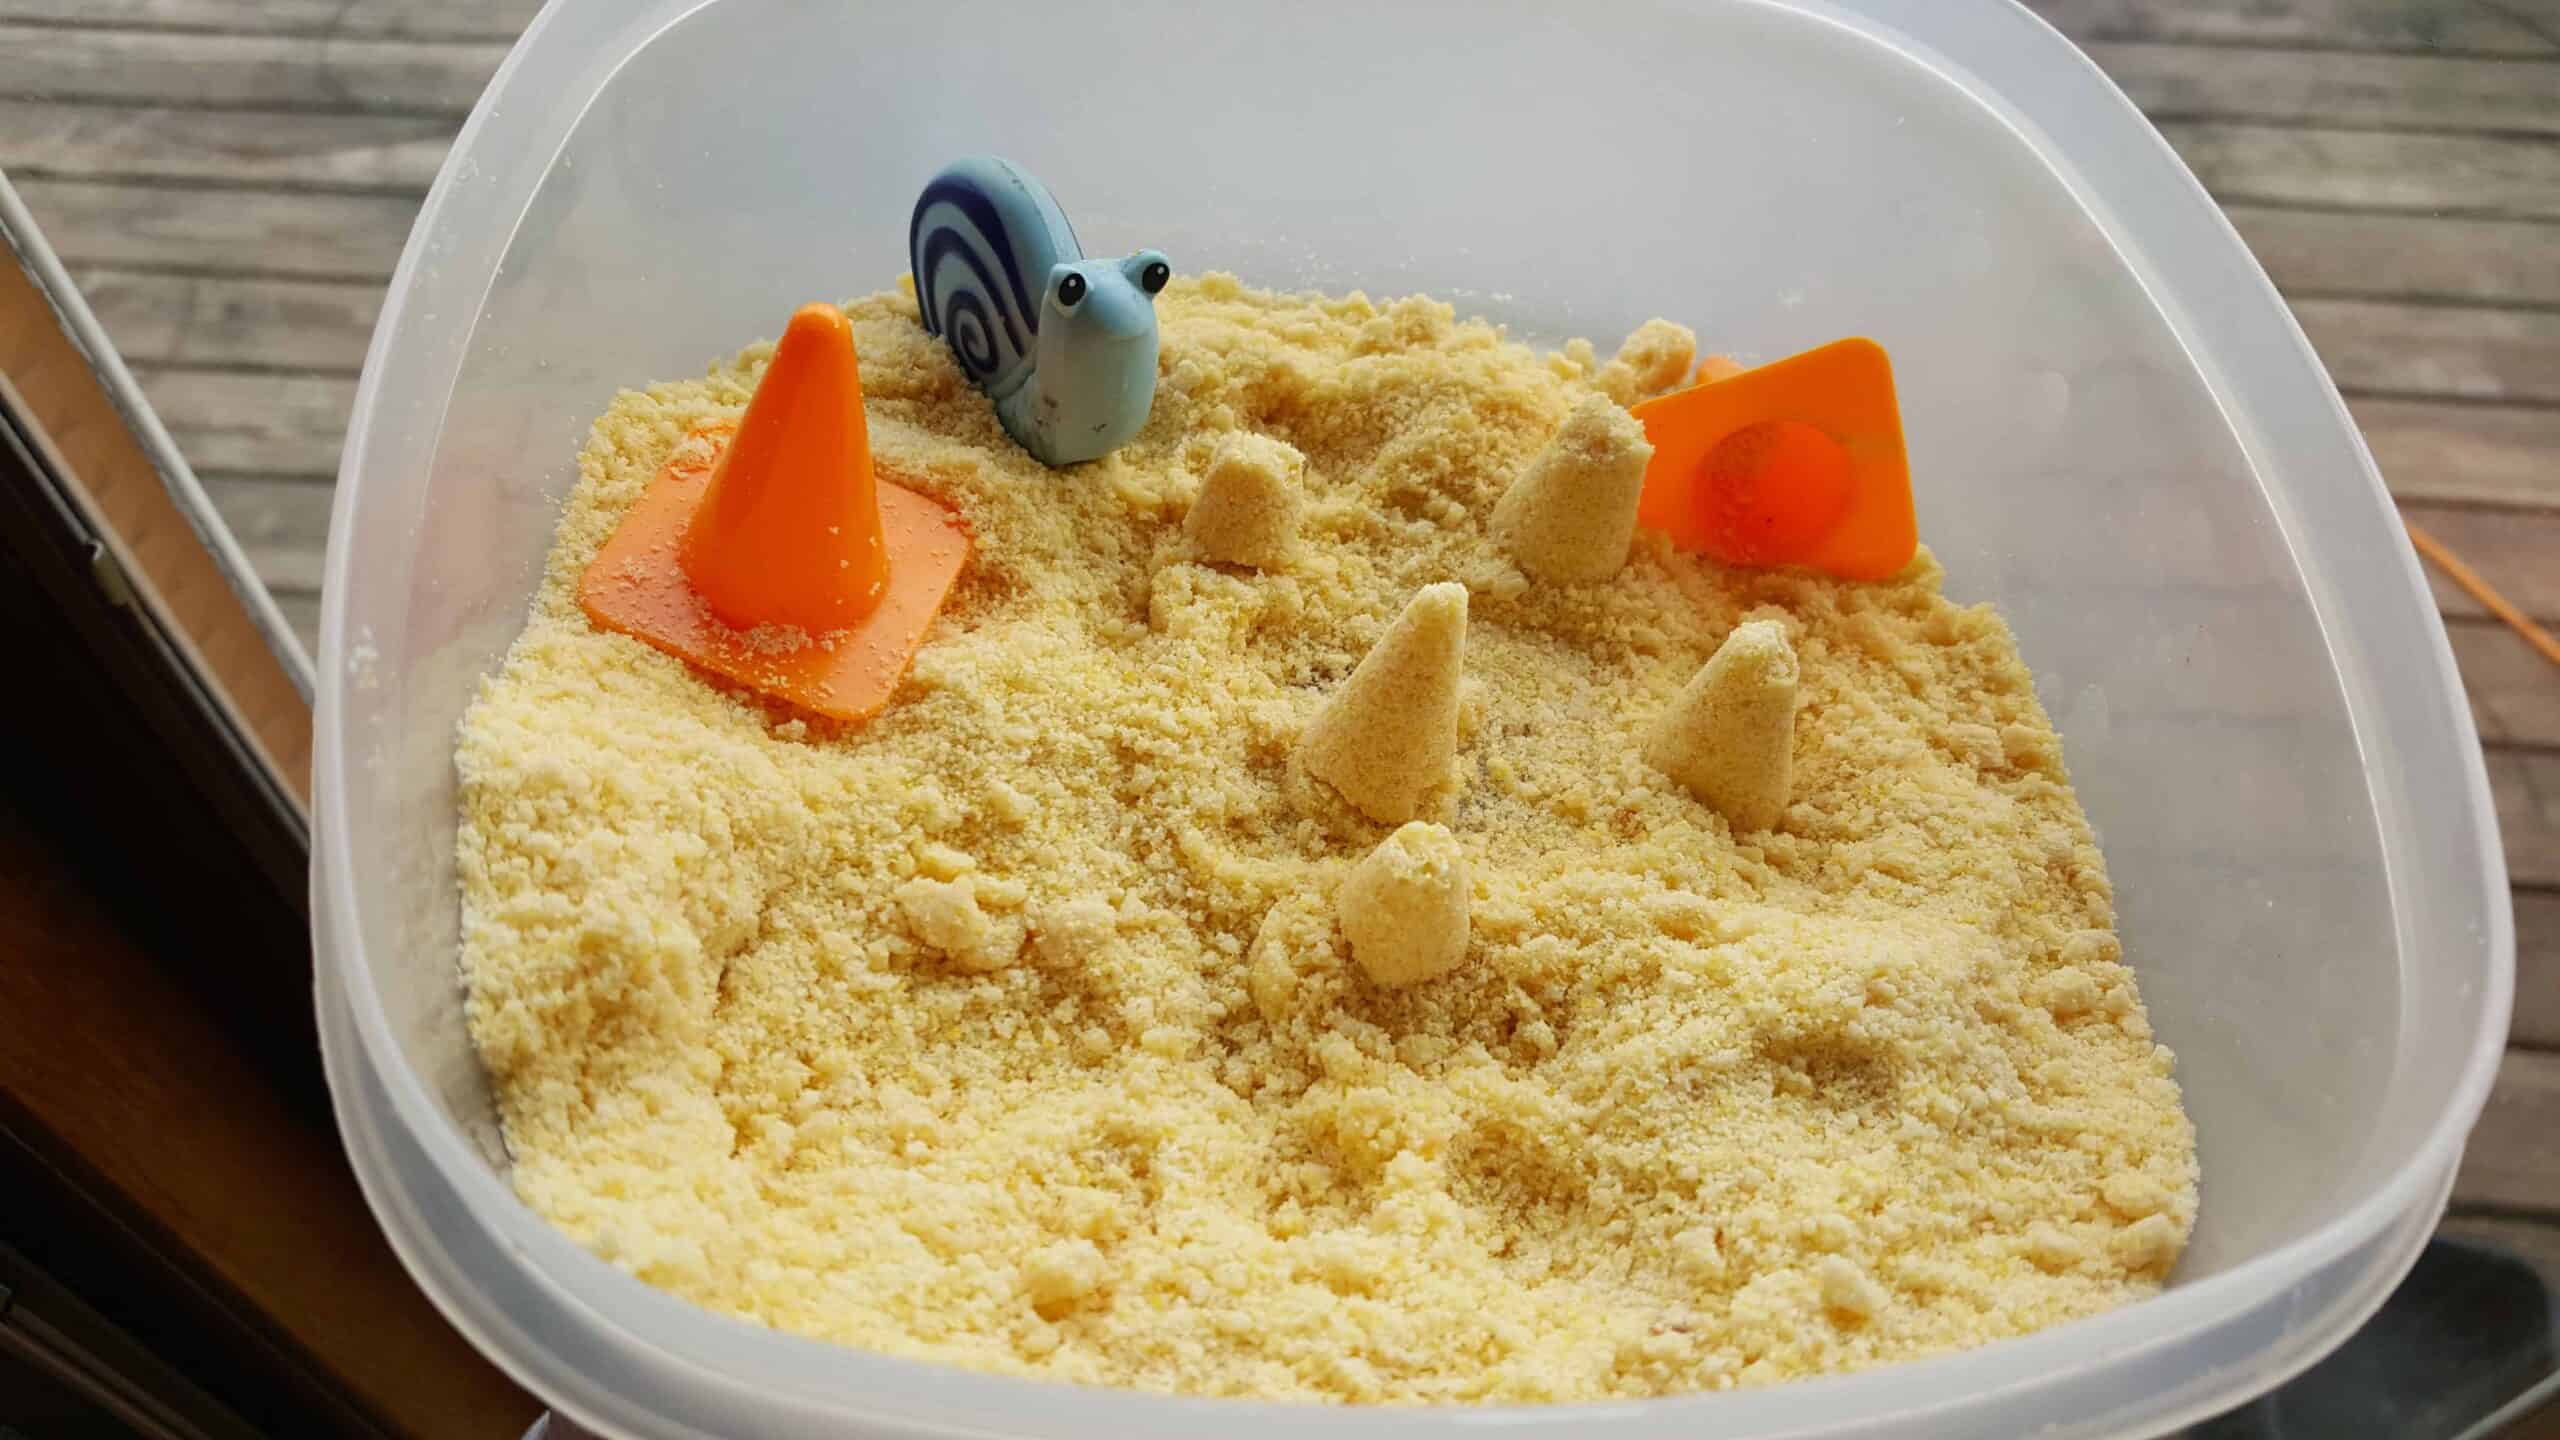 Easter Play with Kinetic Sand - Toddler Approved